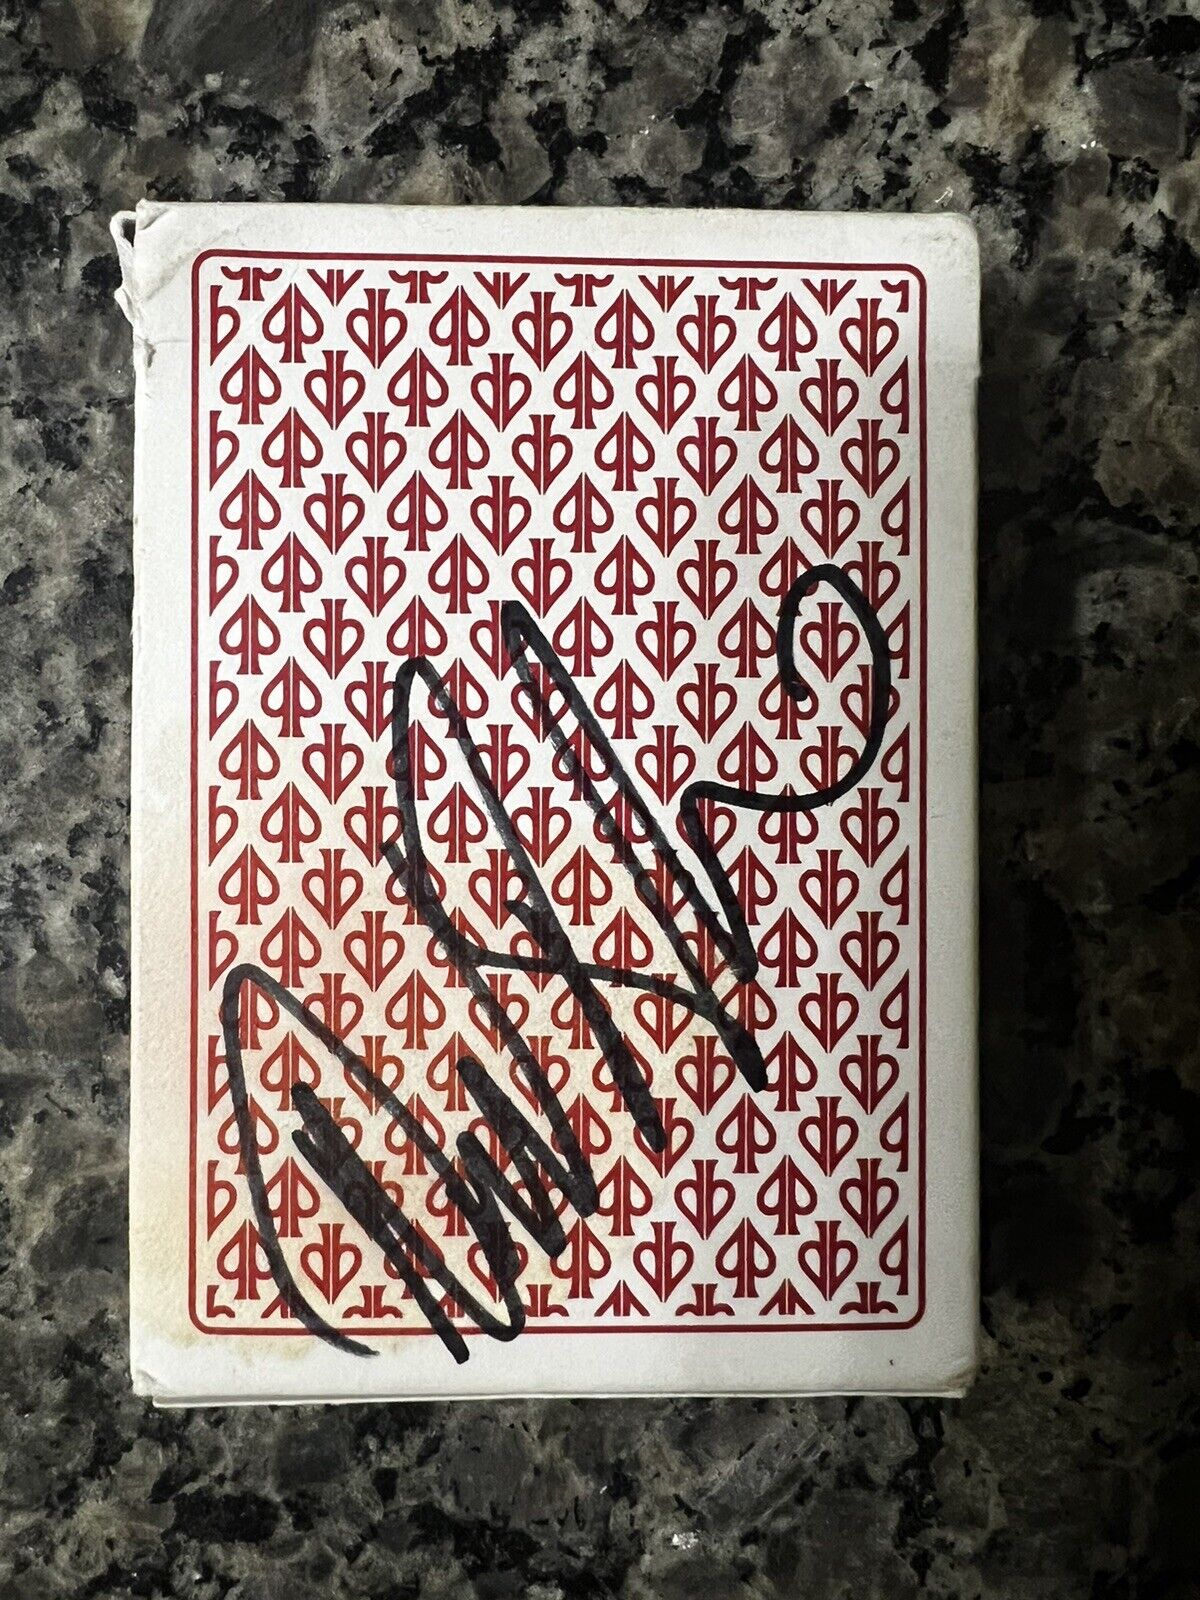 DAVID BLAINE White Lions Tour Edition Playing Card Deck SIGNED - Rare